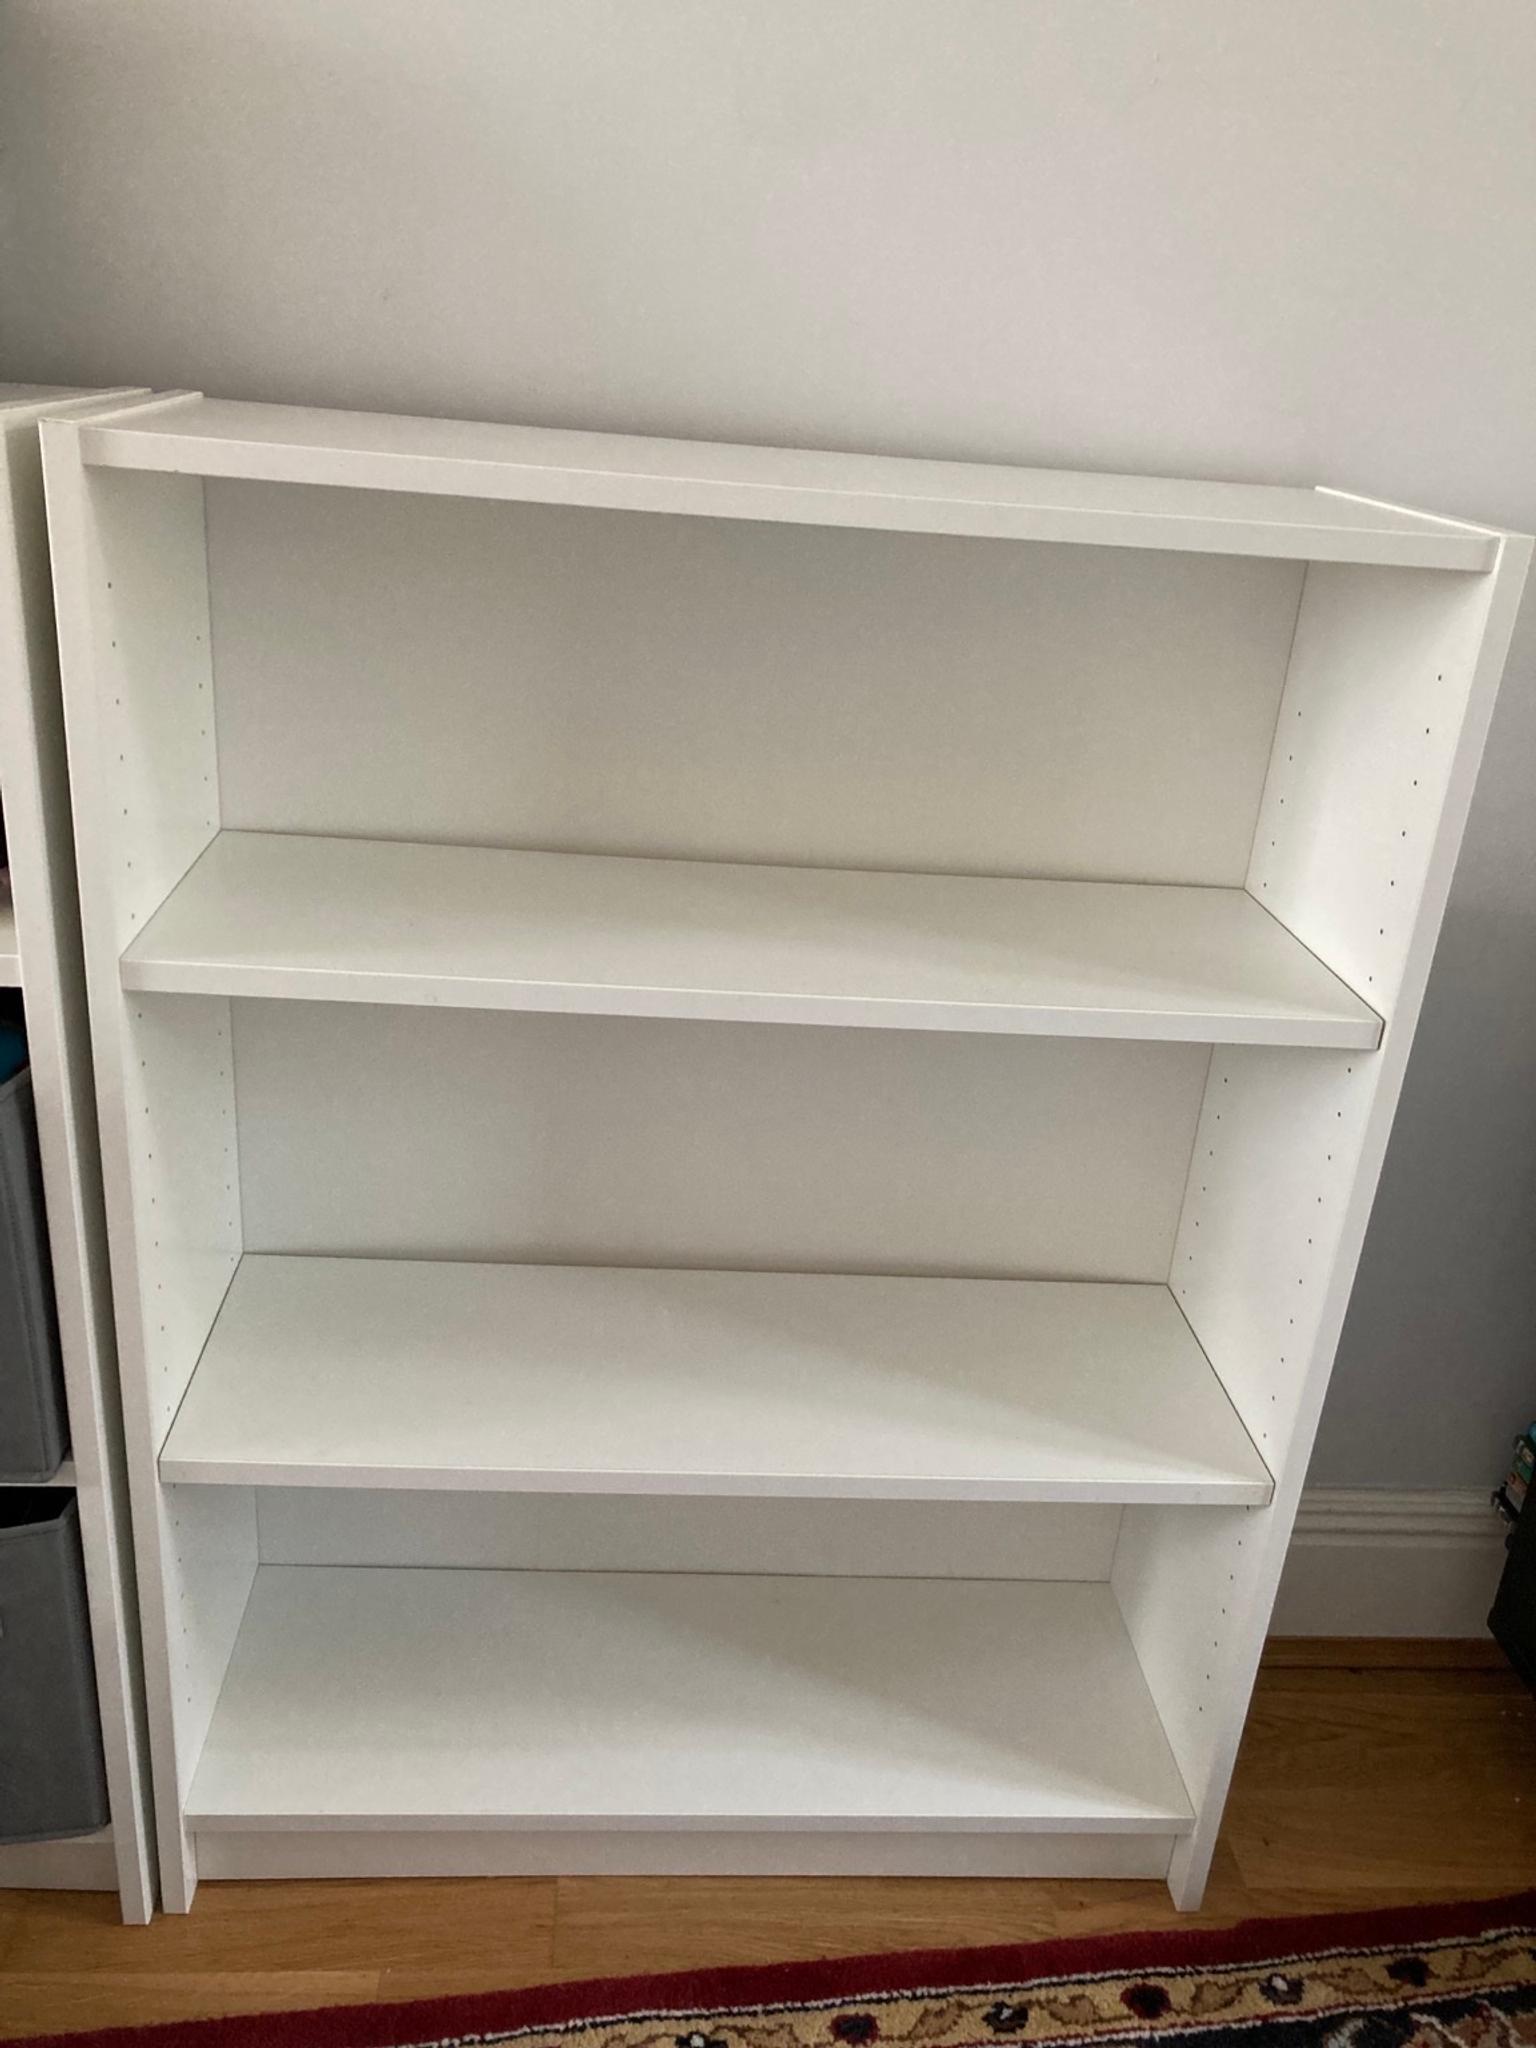 3 X Ikea Billy Bookcase White Make An, Ikea Billy Bookcase With Doors Review